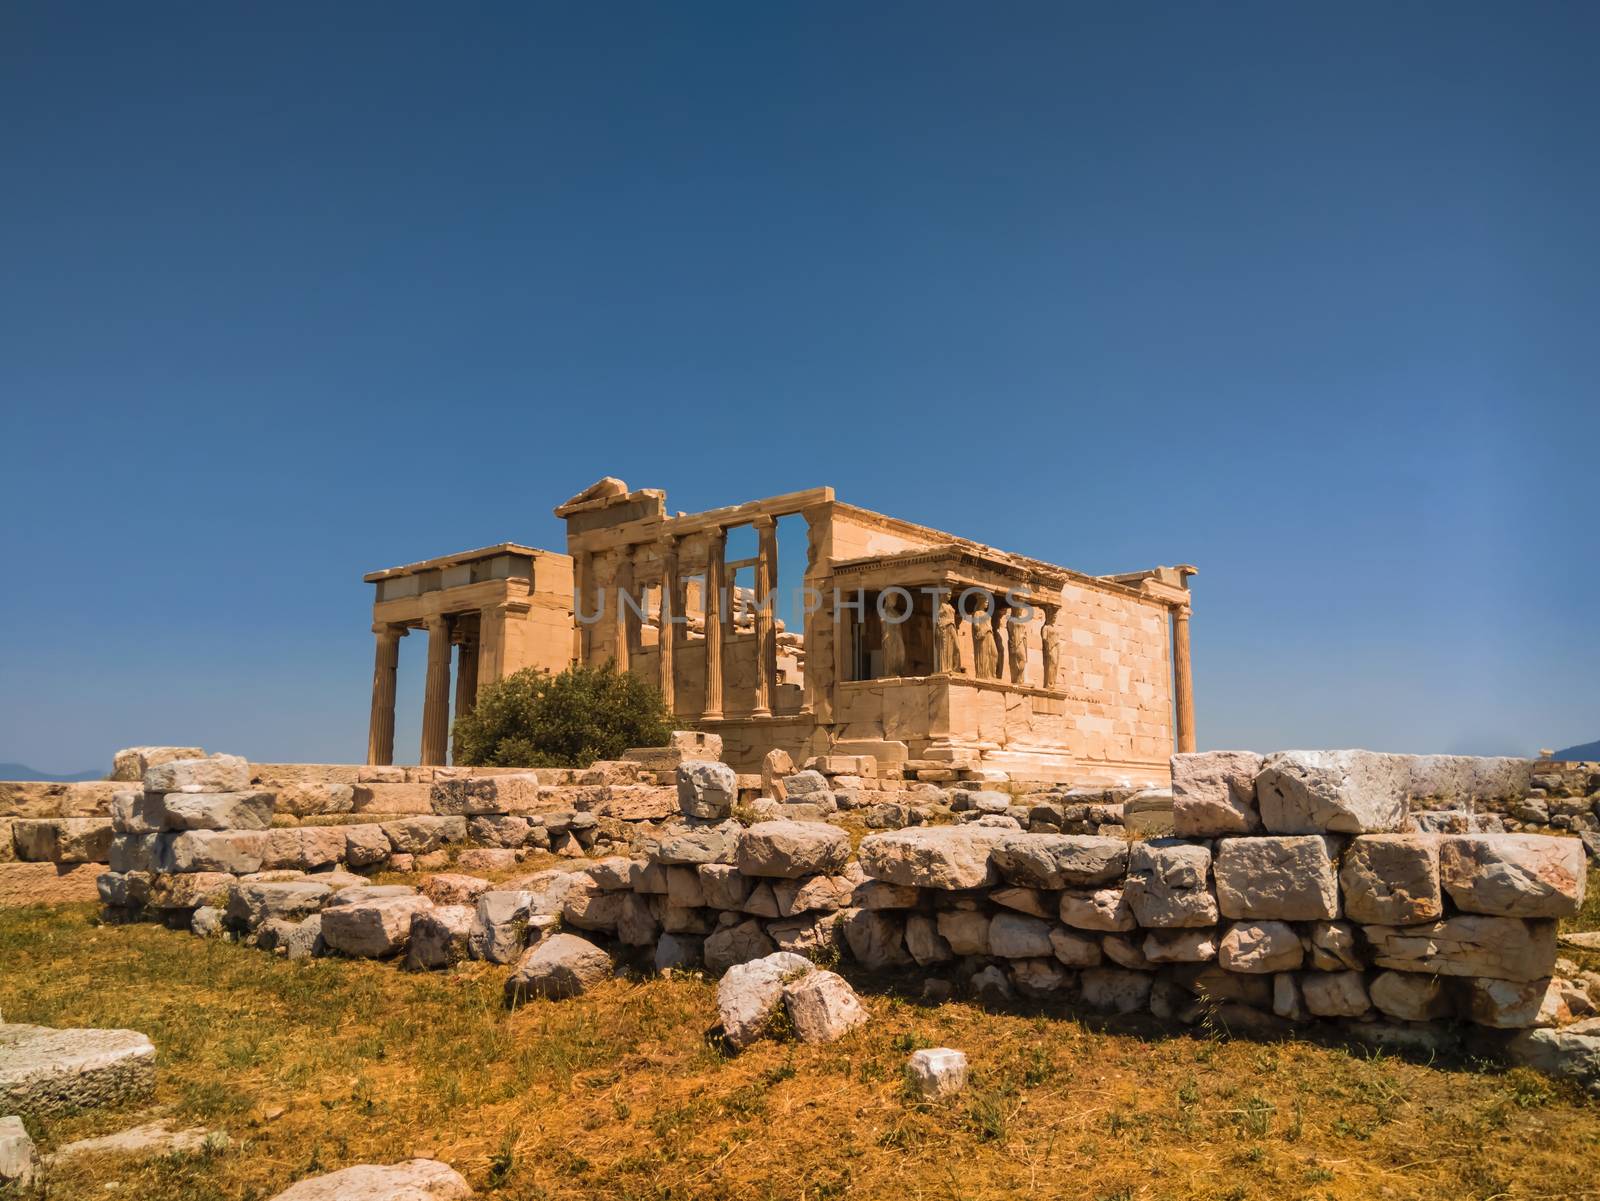 The building is on the north side of the Acropolis of Athens in Greece which was dedicated to both Athena and Poseidon